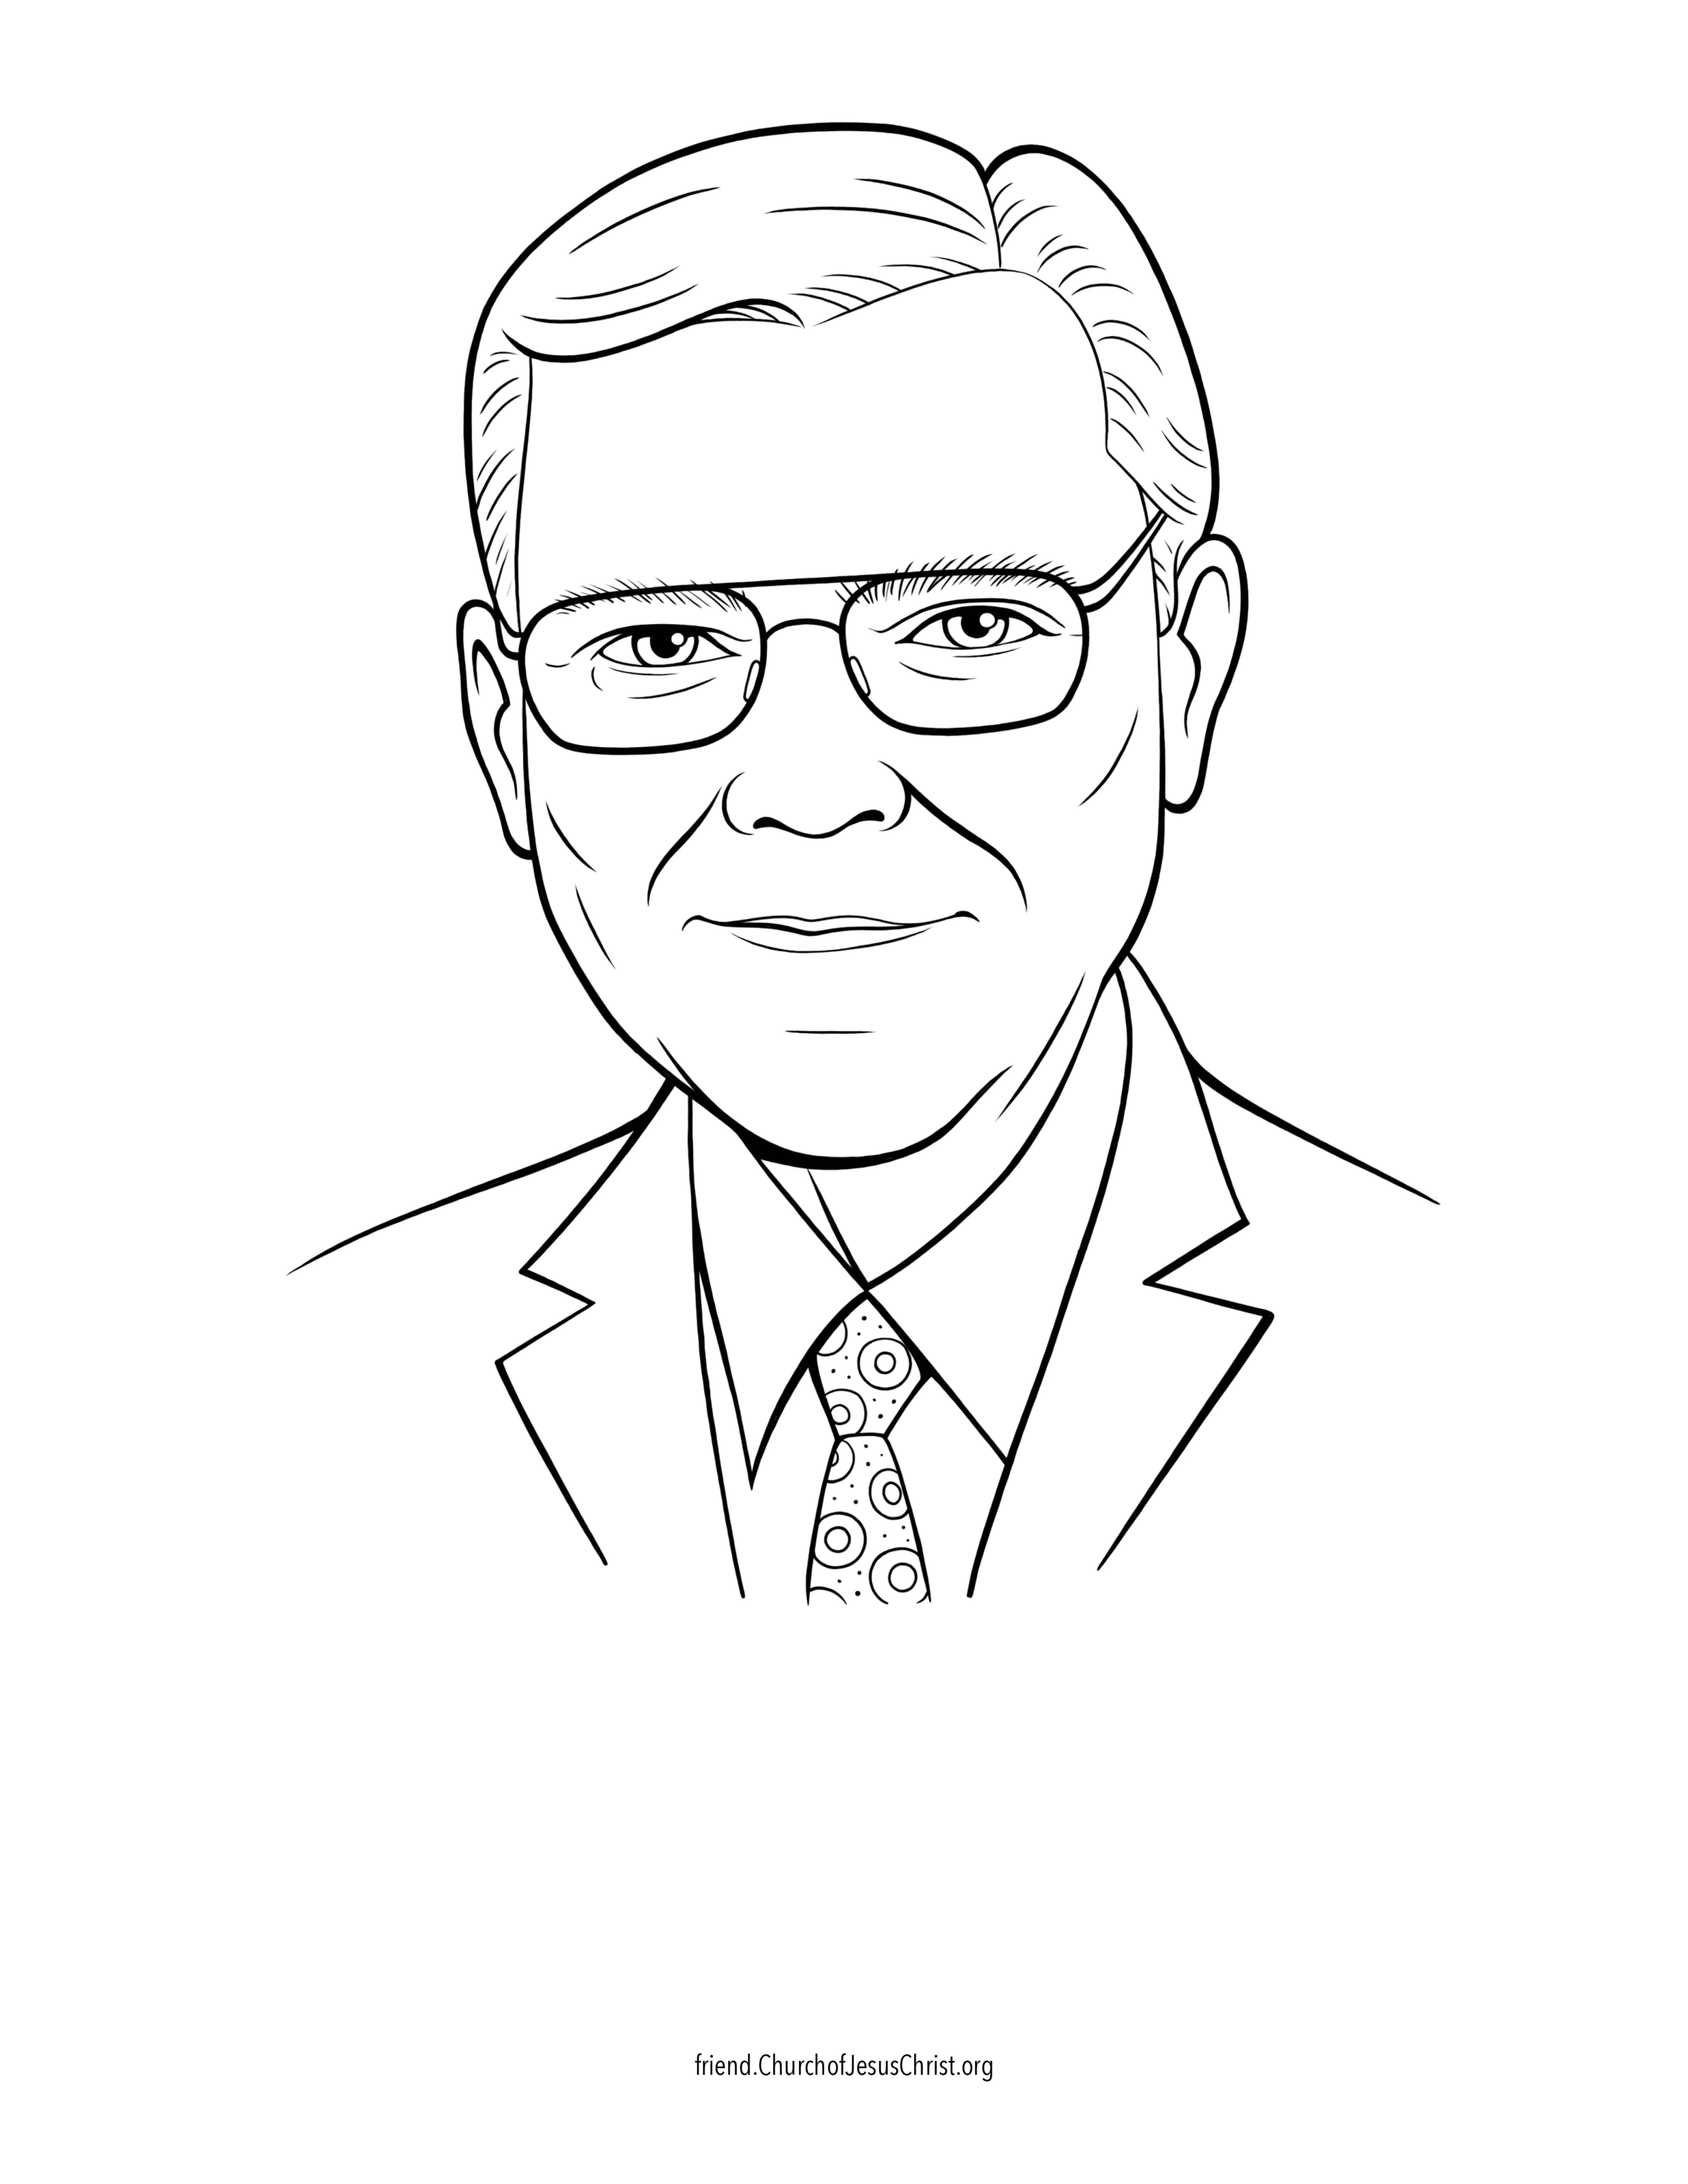 A coloring page of the official portrait of M. Russell Ballard.